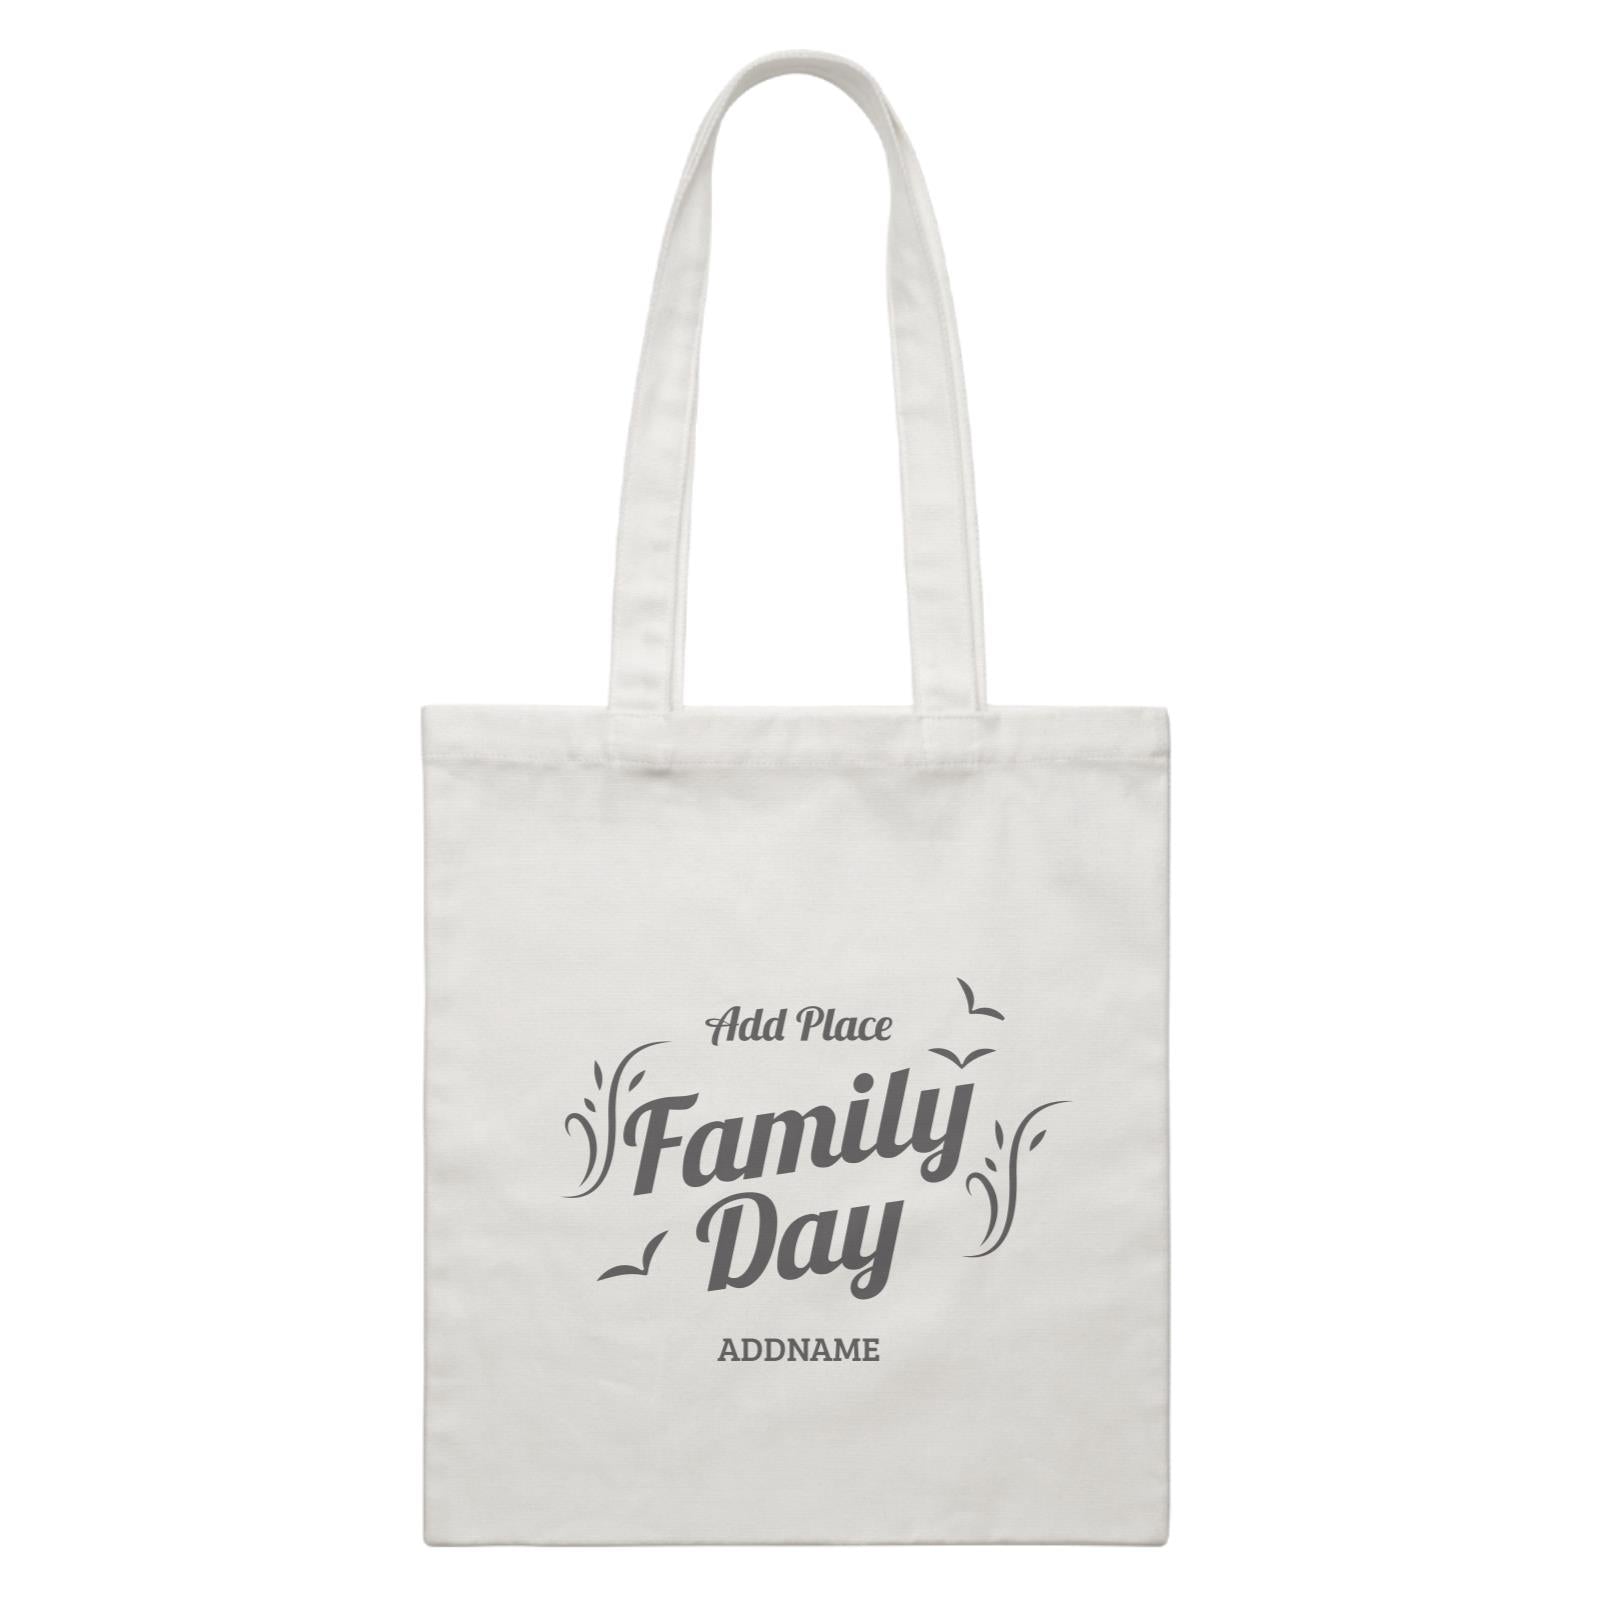 Family Day Flight Birds Icon Family Day Addname And Add Place Accessories White Canvas Bag